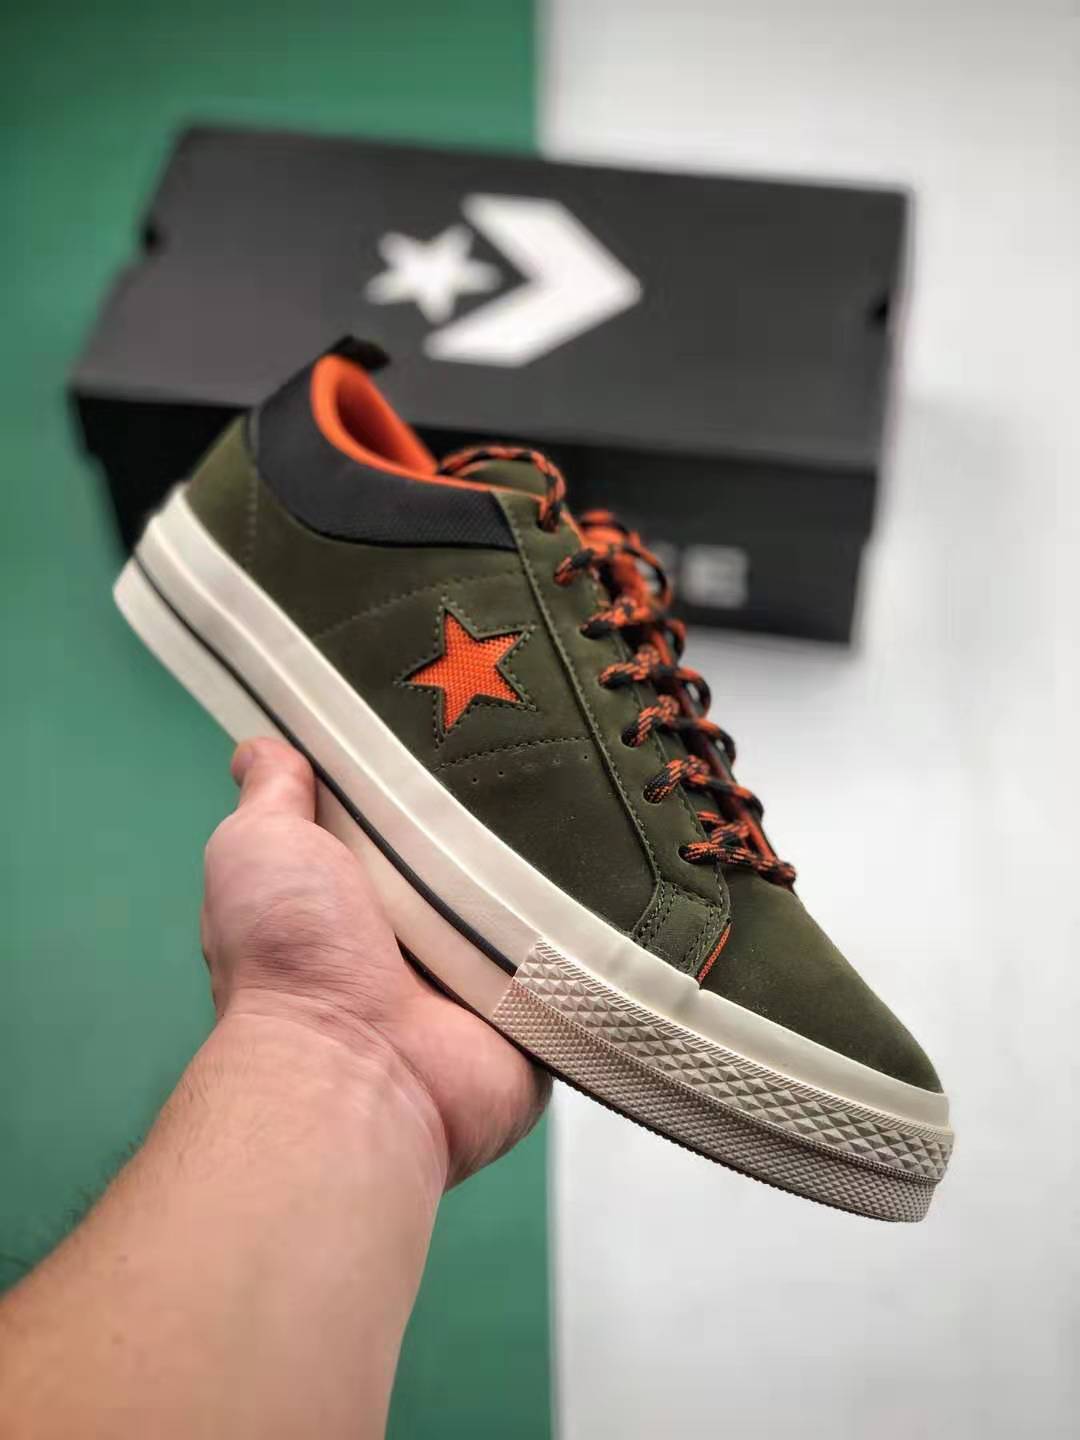 Converse One Star Non-Slip Green Skateboarding Shoes 162544C | Wear-Resistant & Minimalistic Casual